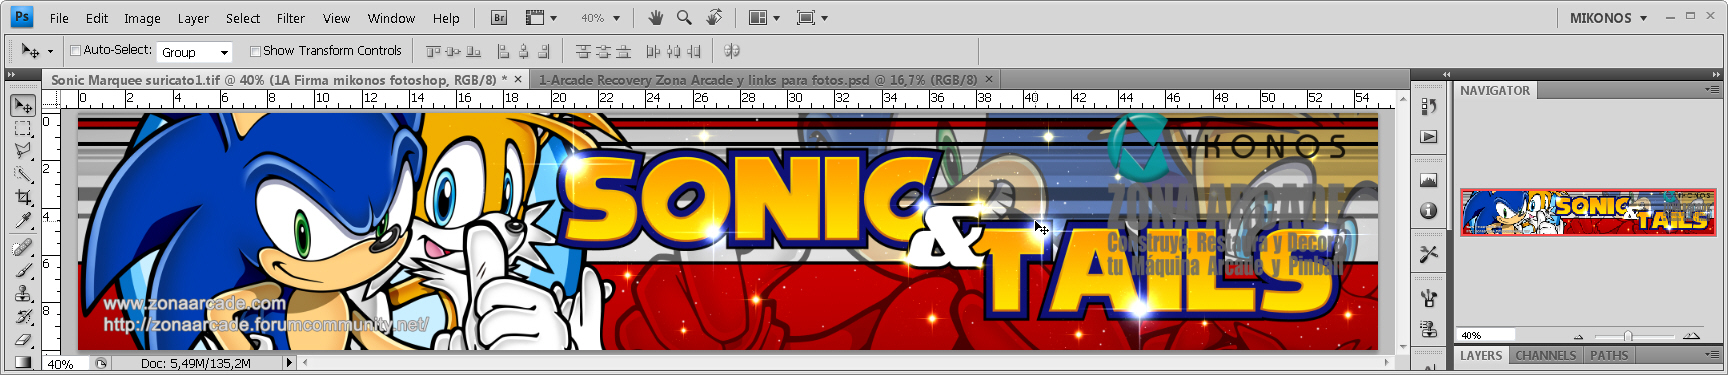 SonicTails%20Marquee1